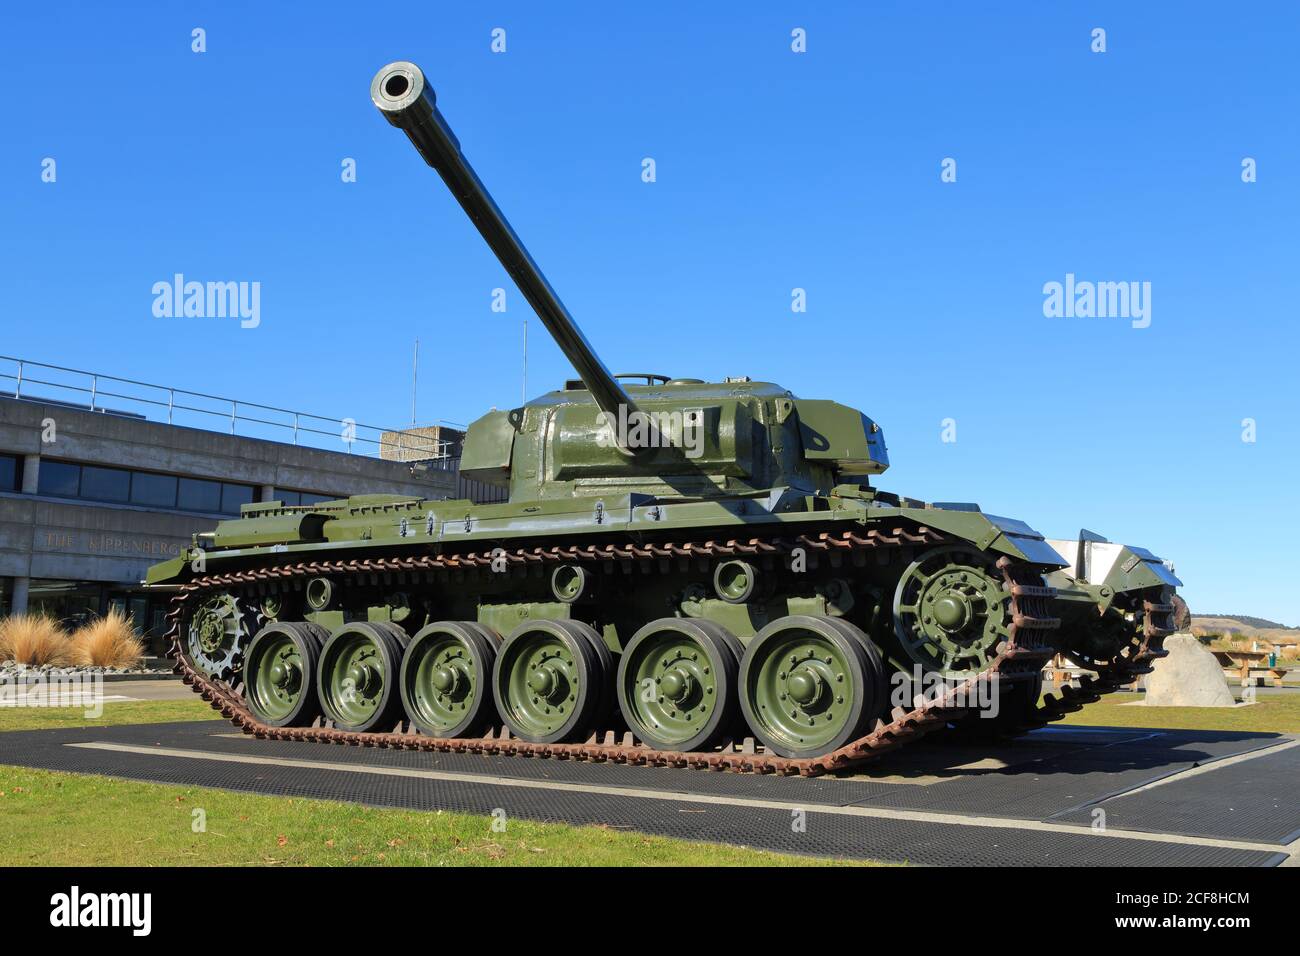 A British Centurion tank, a main battle tank of the post-WW2 period, on display outside the National Army Museum, Waiouru, New Zealand Stock Photo